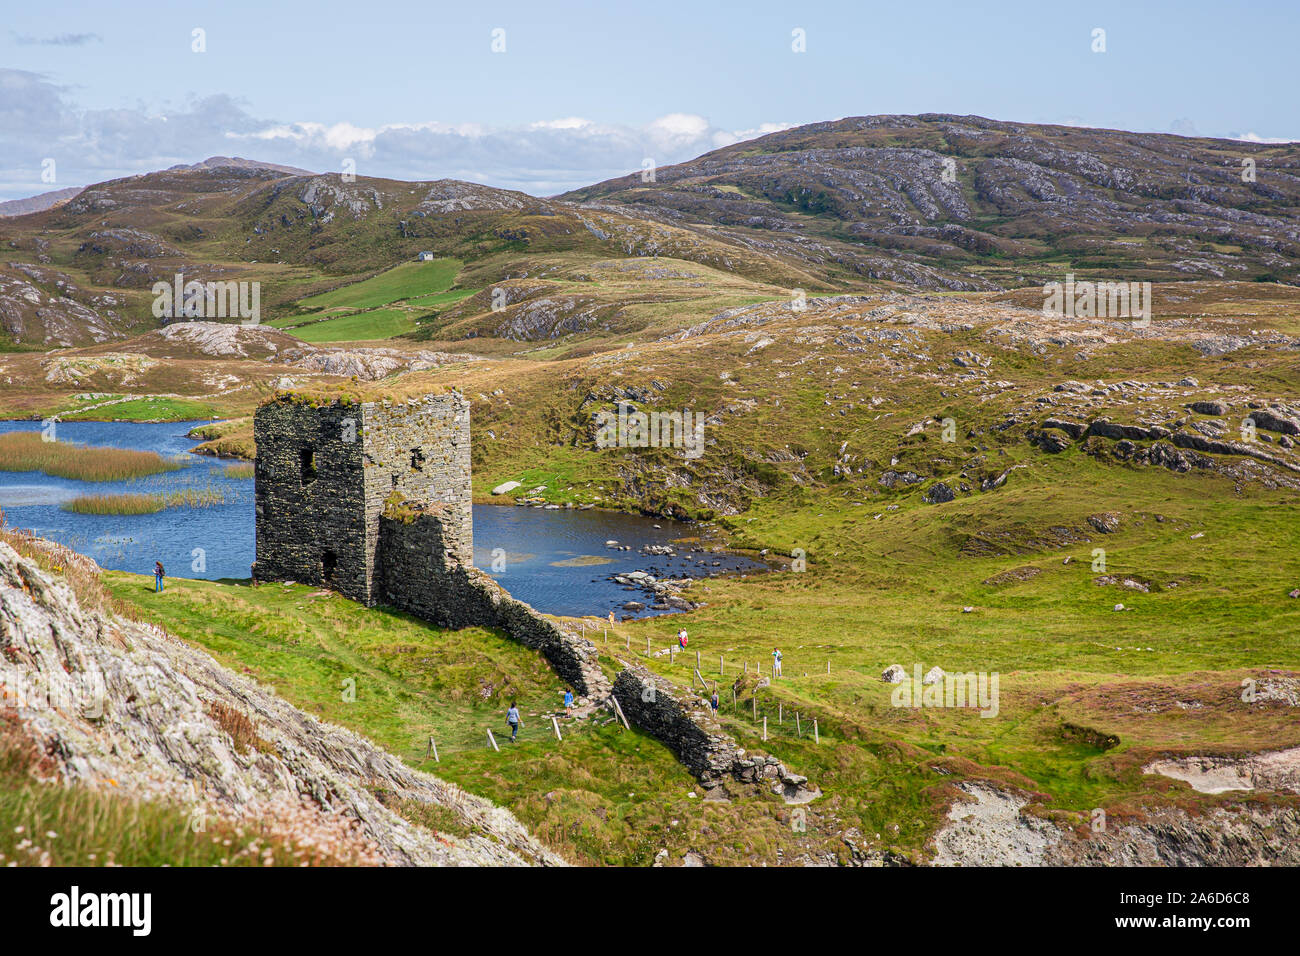 Scenic ruins of Three Castles Head or Dunlough Castle located in atop the cliffs at the northern tip of the Mizen Peninsula. Irish Landscapes. Stock Photo